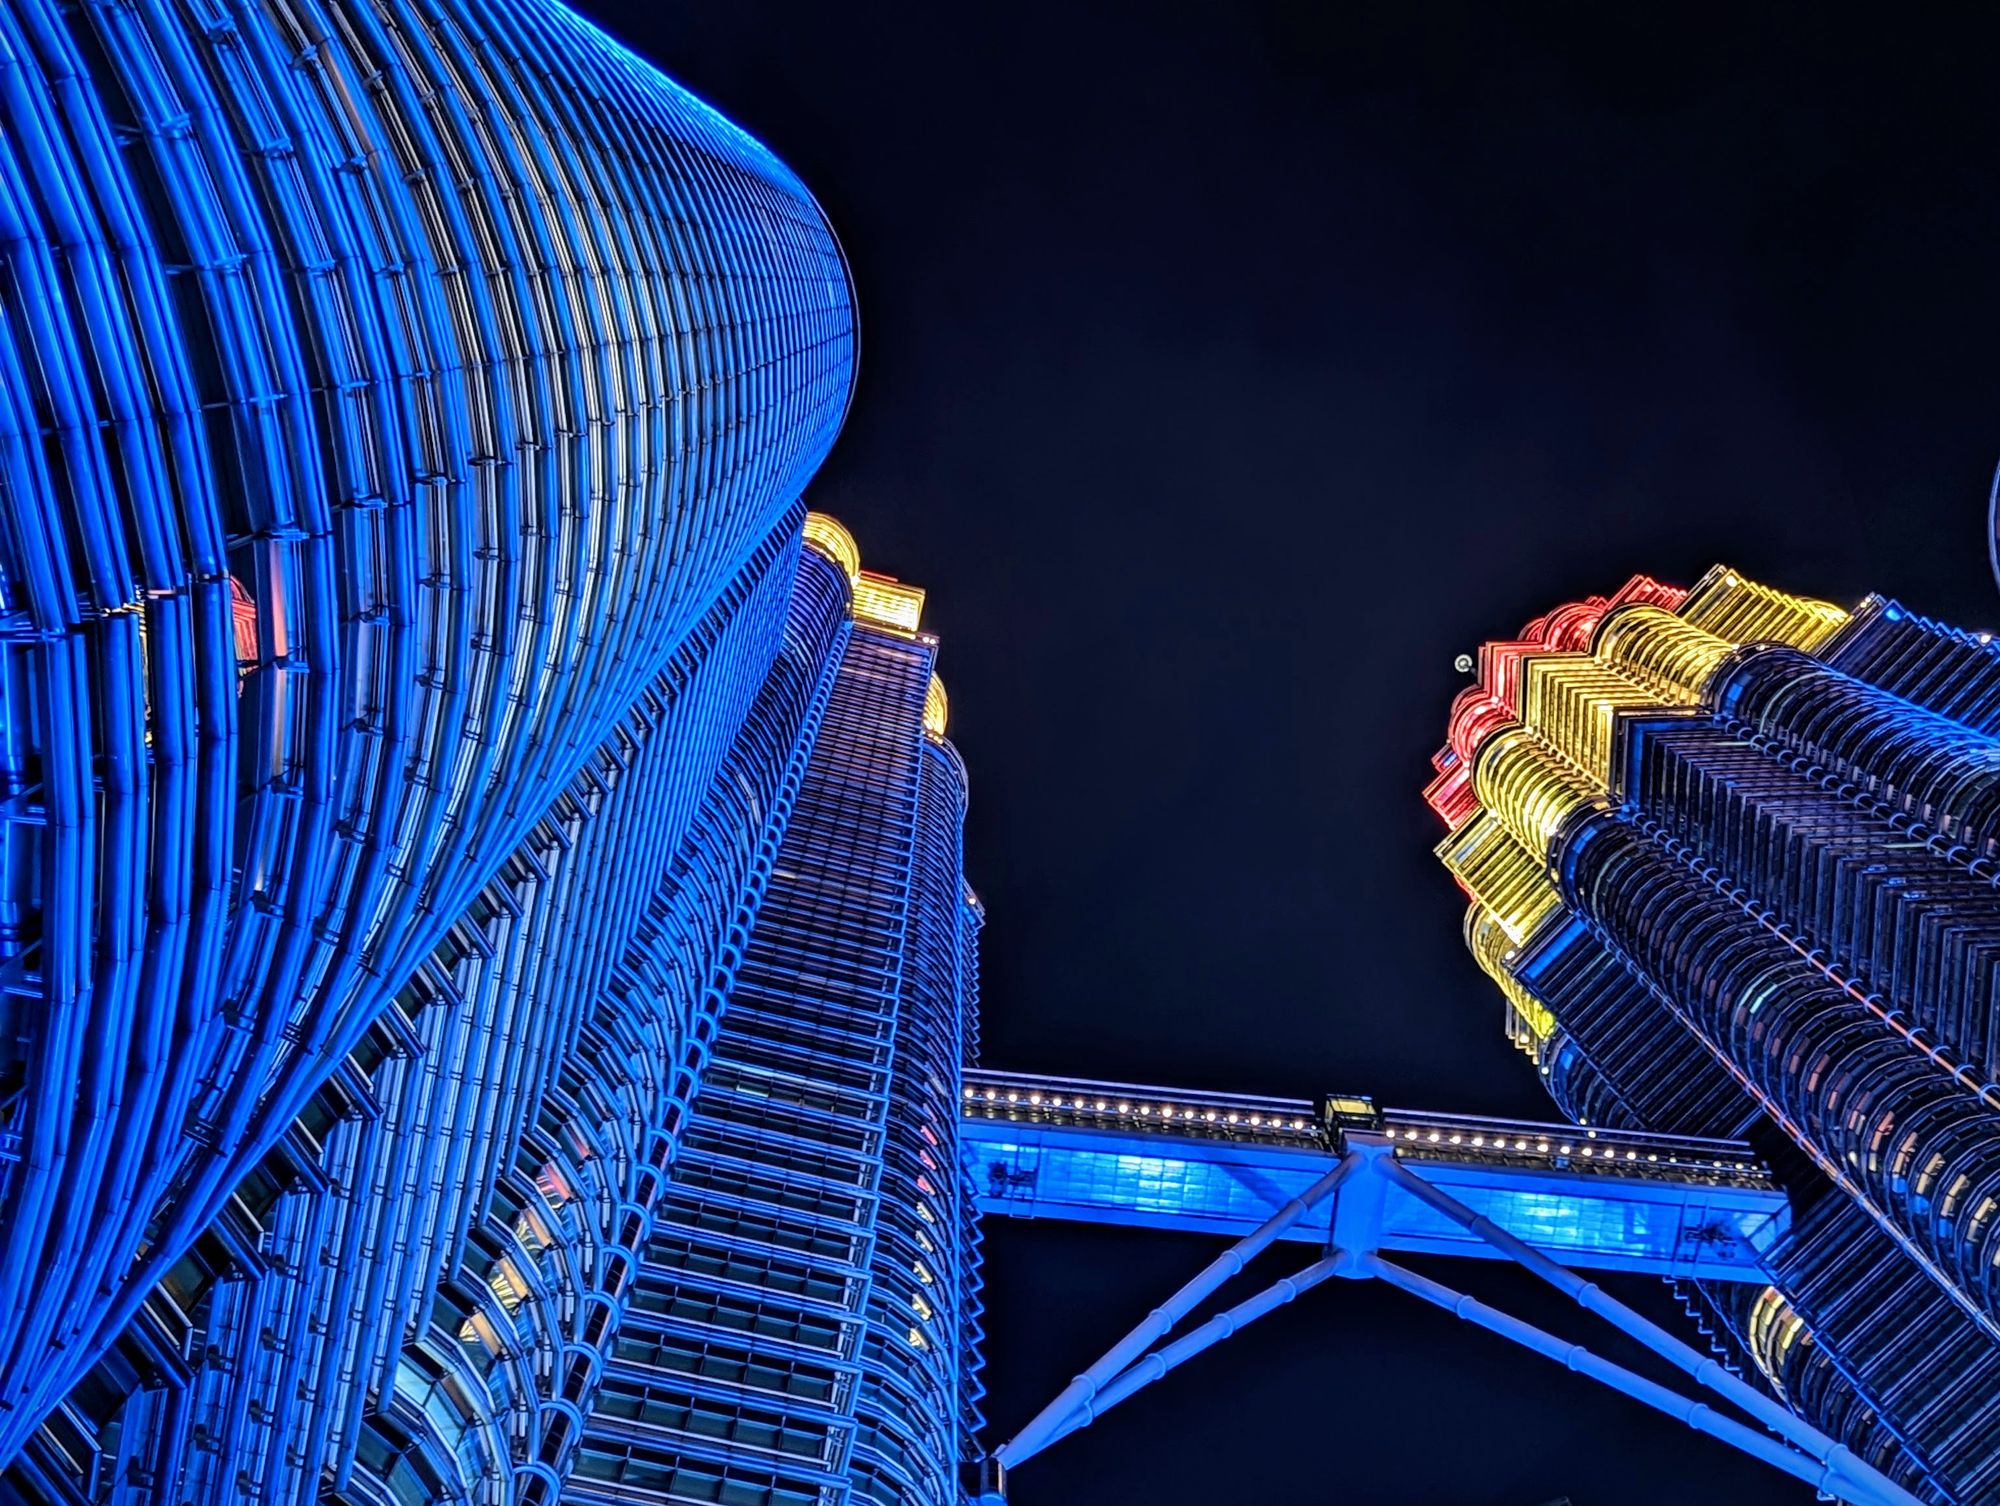 A photo of the Patronas Towers in KL from a steep angle below, with the towers lit in the blue, yellow, and red colors of the Malaysian flag.